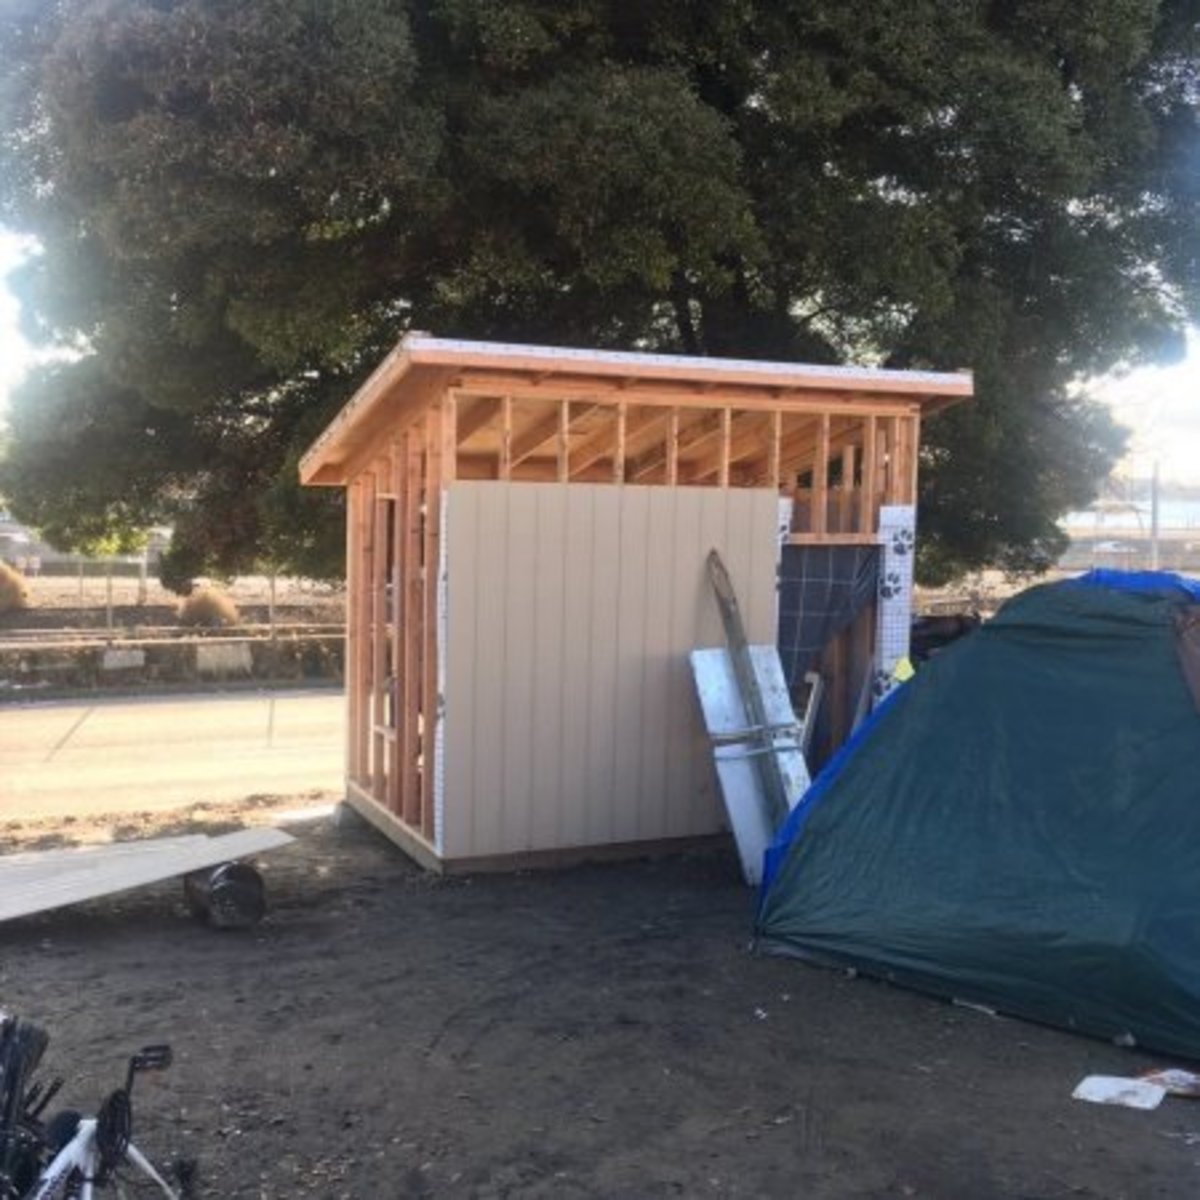 A home being built for an unhoused resident in Oakland. (Zack Haber/Twitter)